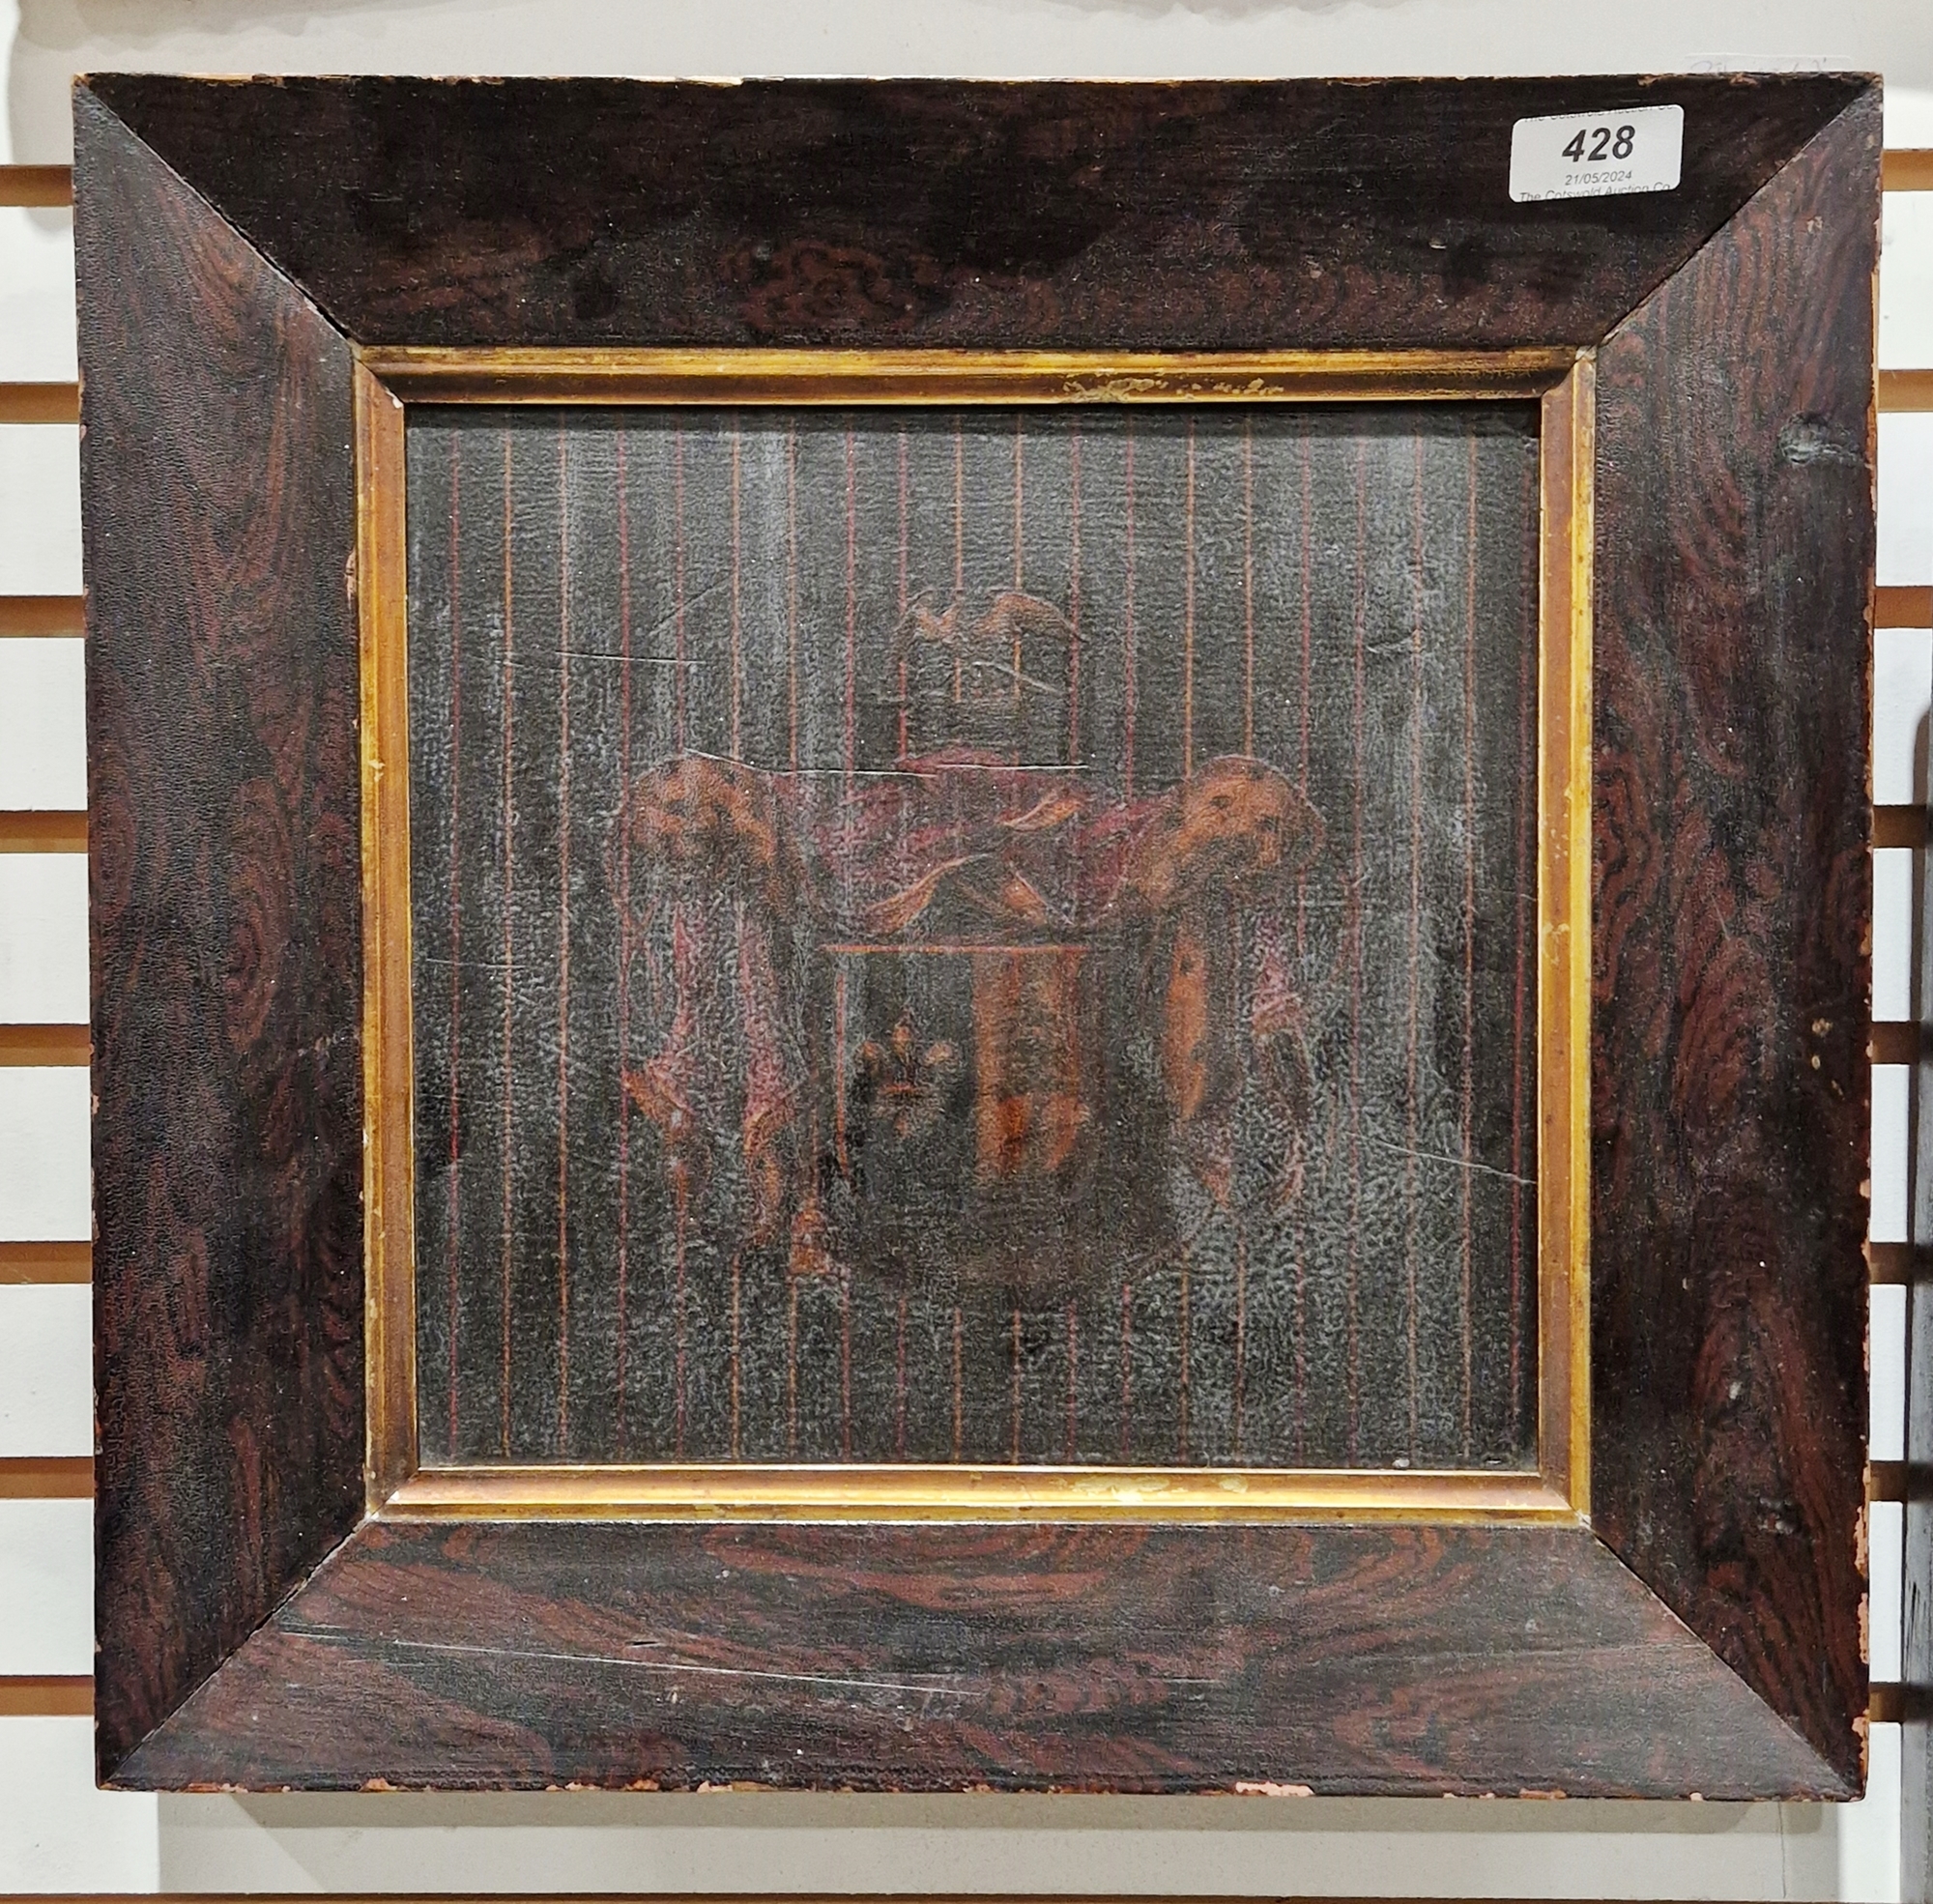 Two 19th century framed painted coaching armorial panels, each with coat of arms swagged or - Image 2 of 2